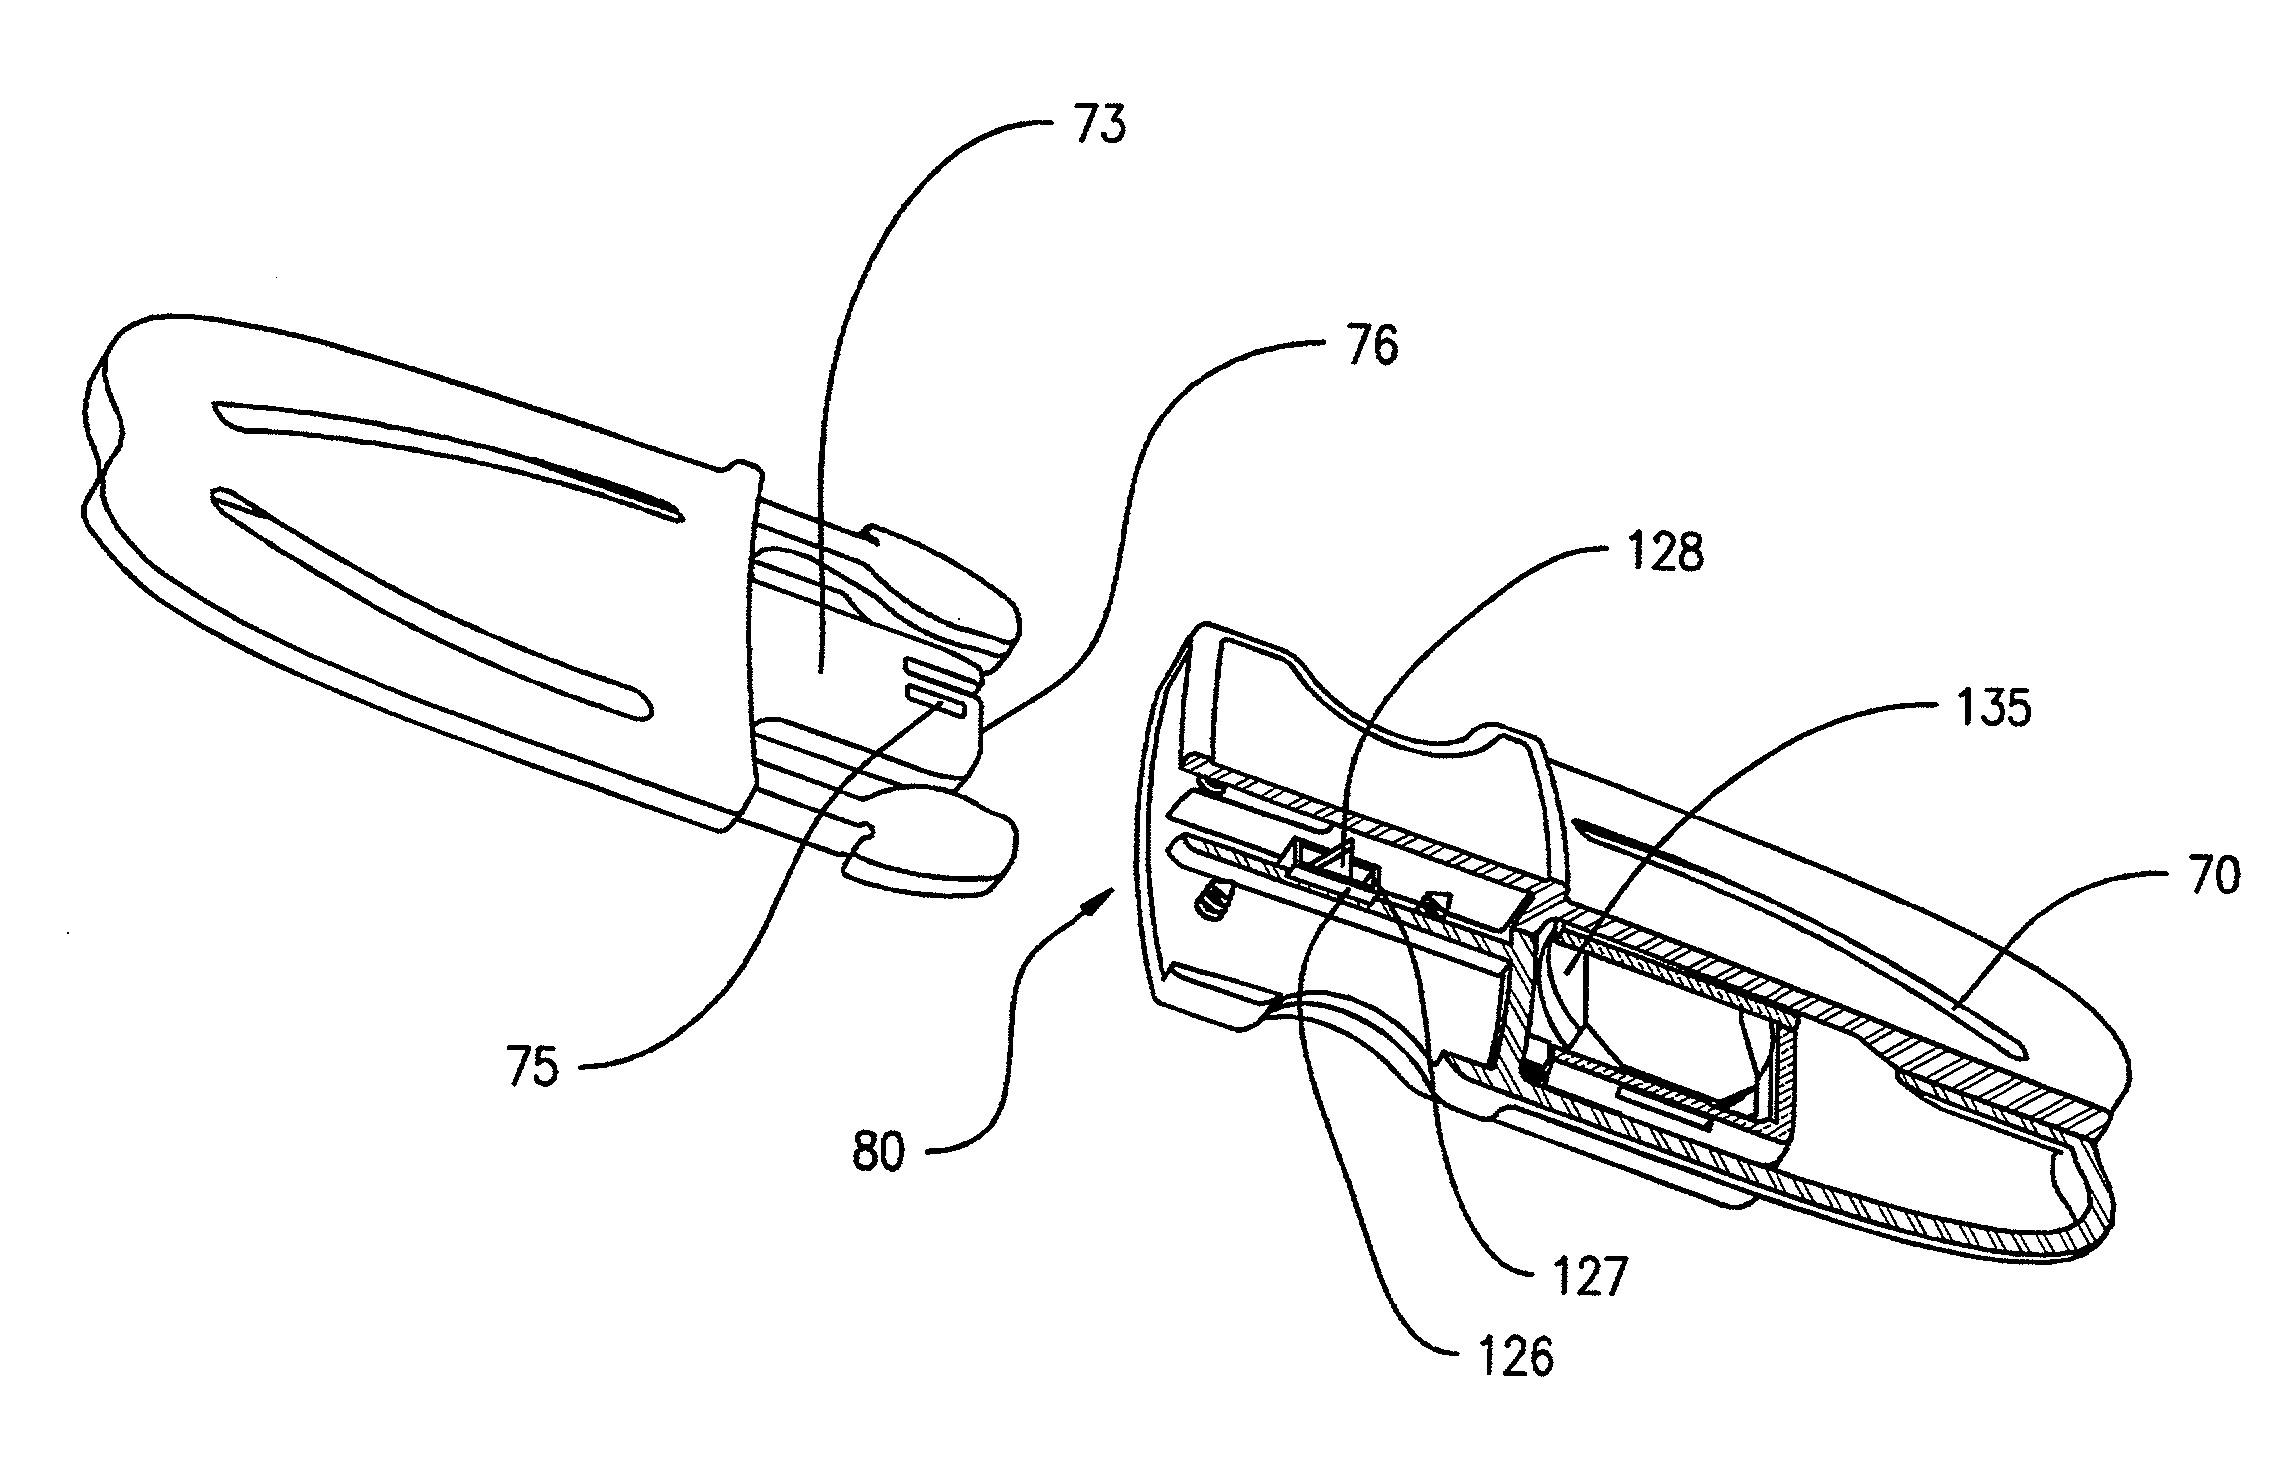 Warning system for detecting infant seat buckle securement